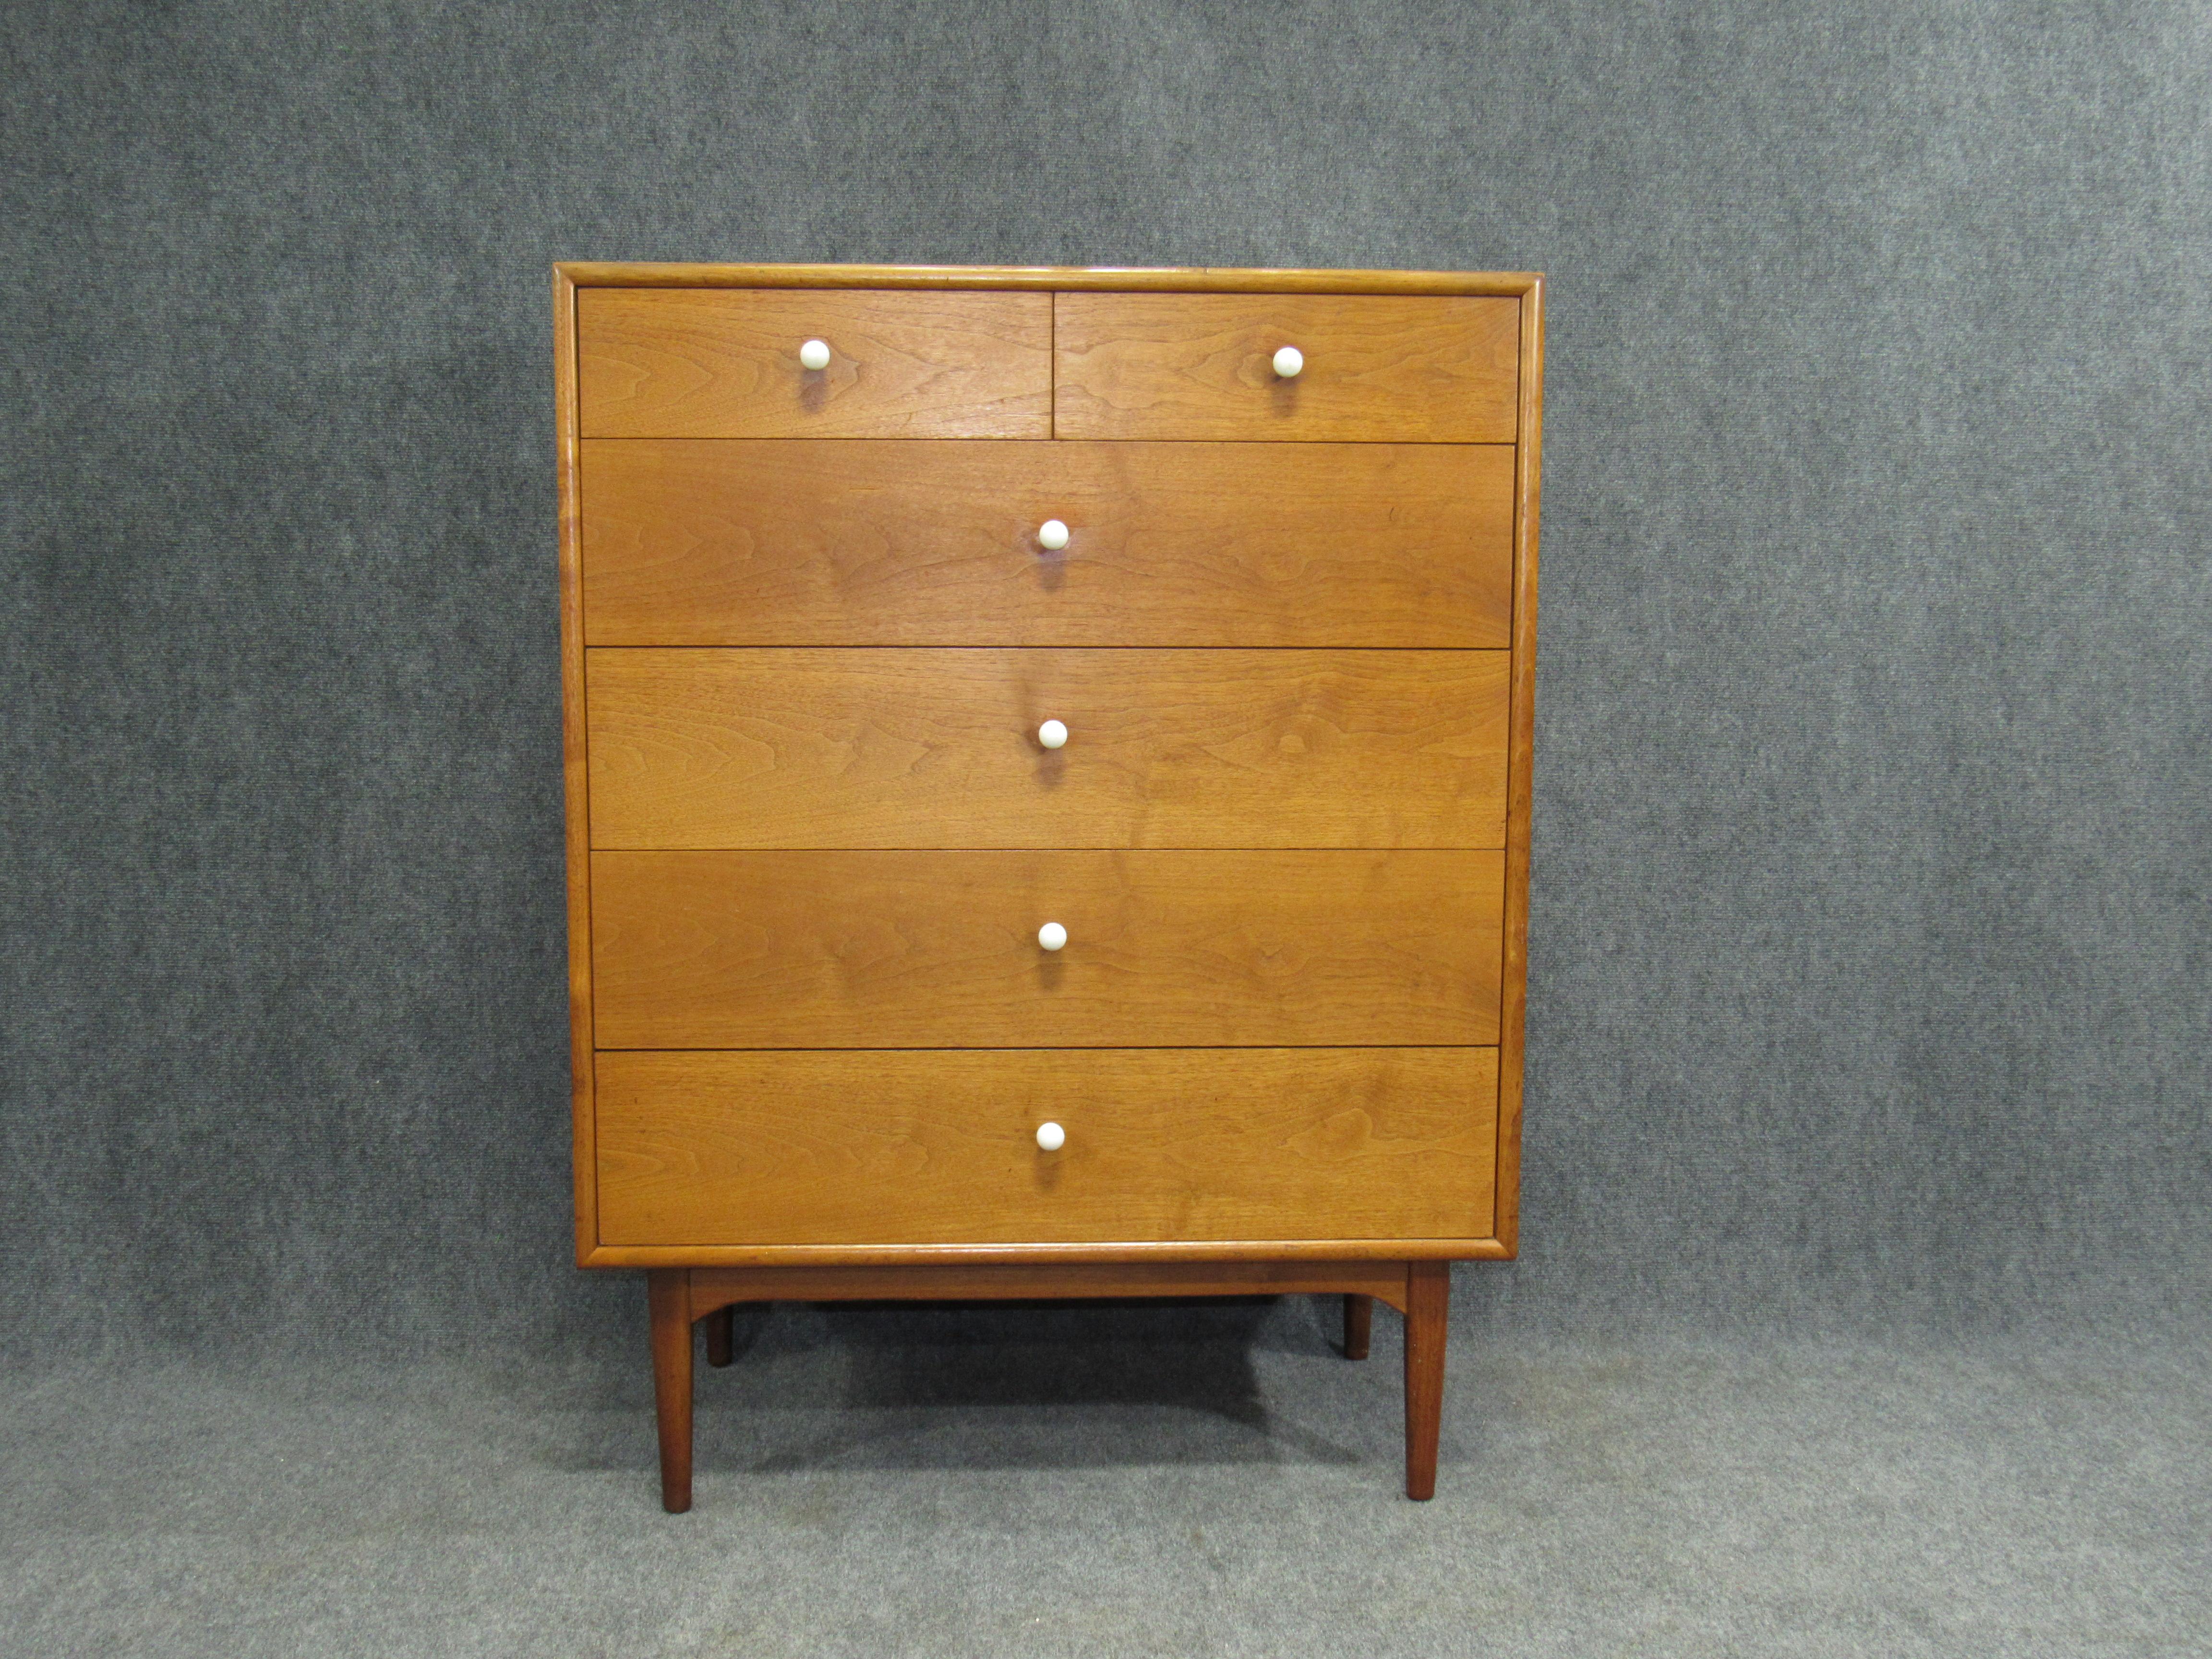 Midcentury walnut tall chest of drawers by Kipp Stewart for Drexel. Excellent professionally restored vintage condition.